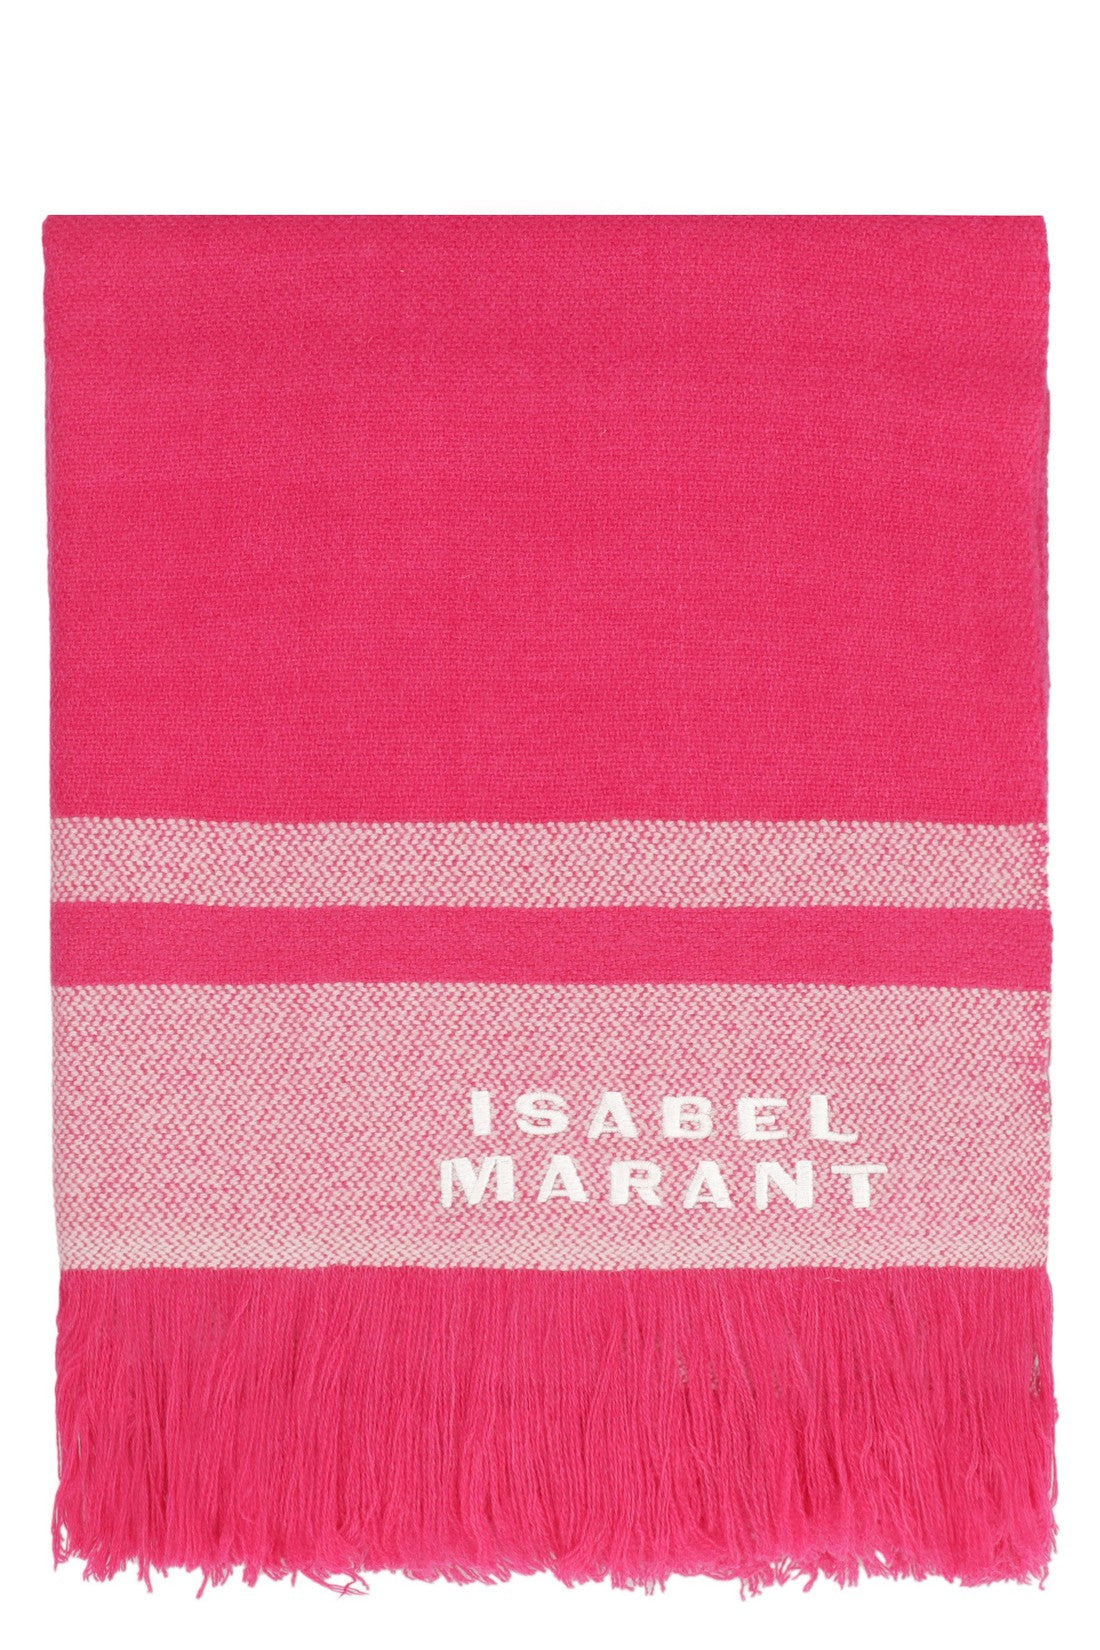 Isabel Marant-OUTLET-SALE-Anika wool and cashemre scarf-ARCHIVIST